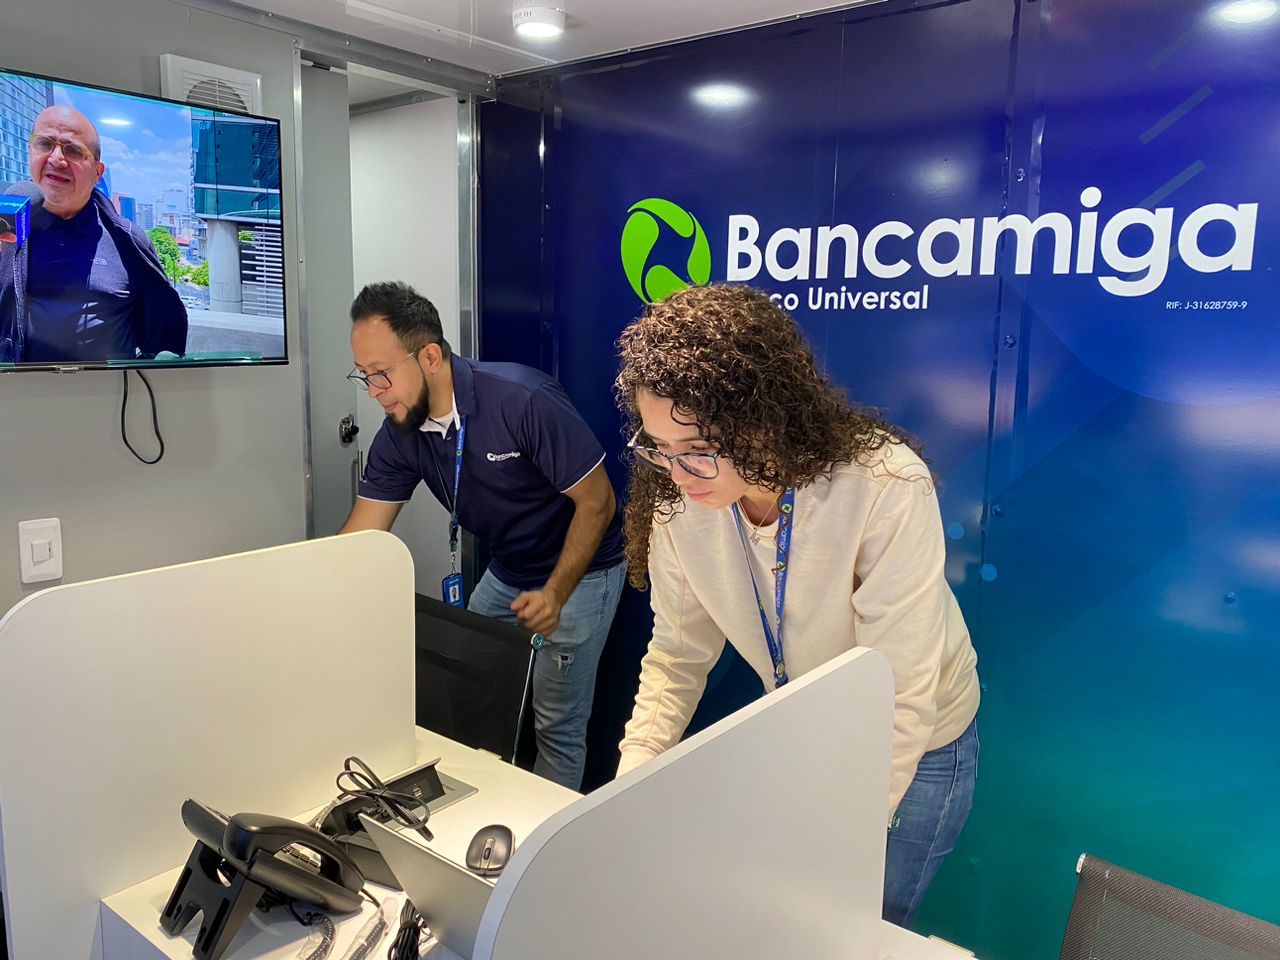 The mobile agency presents and puts Bancamiga's innovative products at the service of interested parties